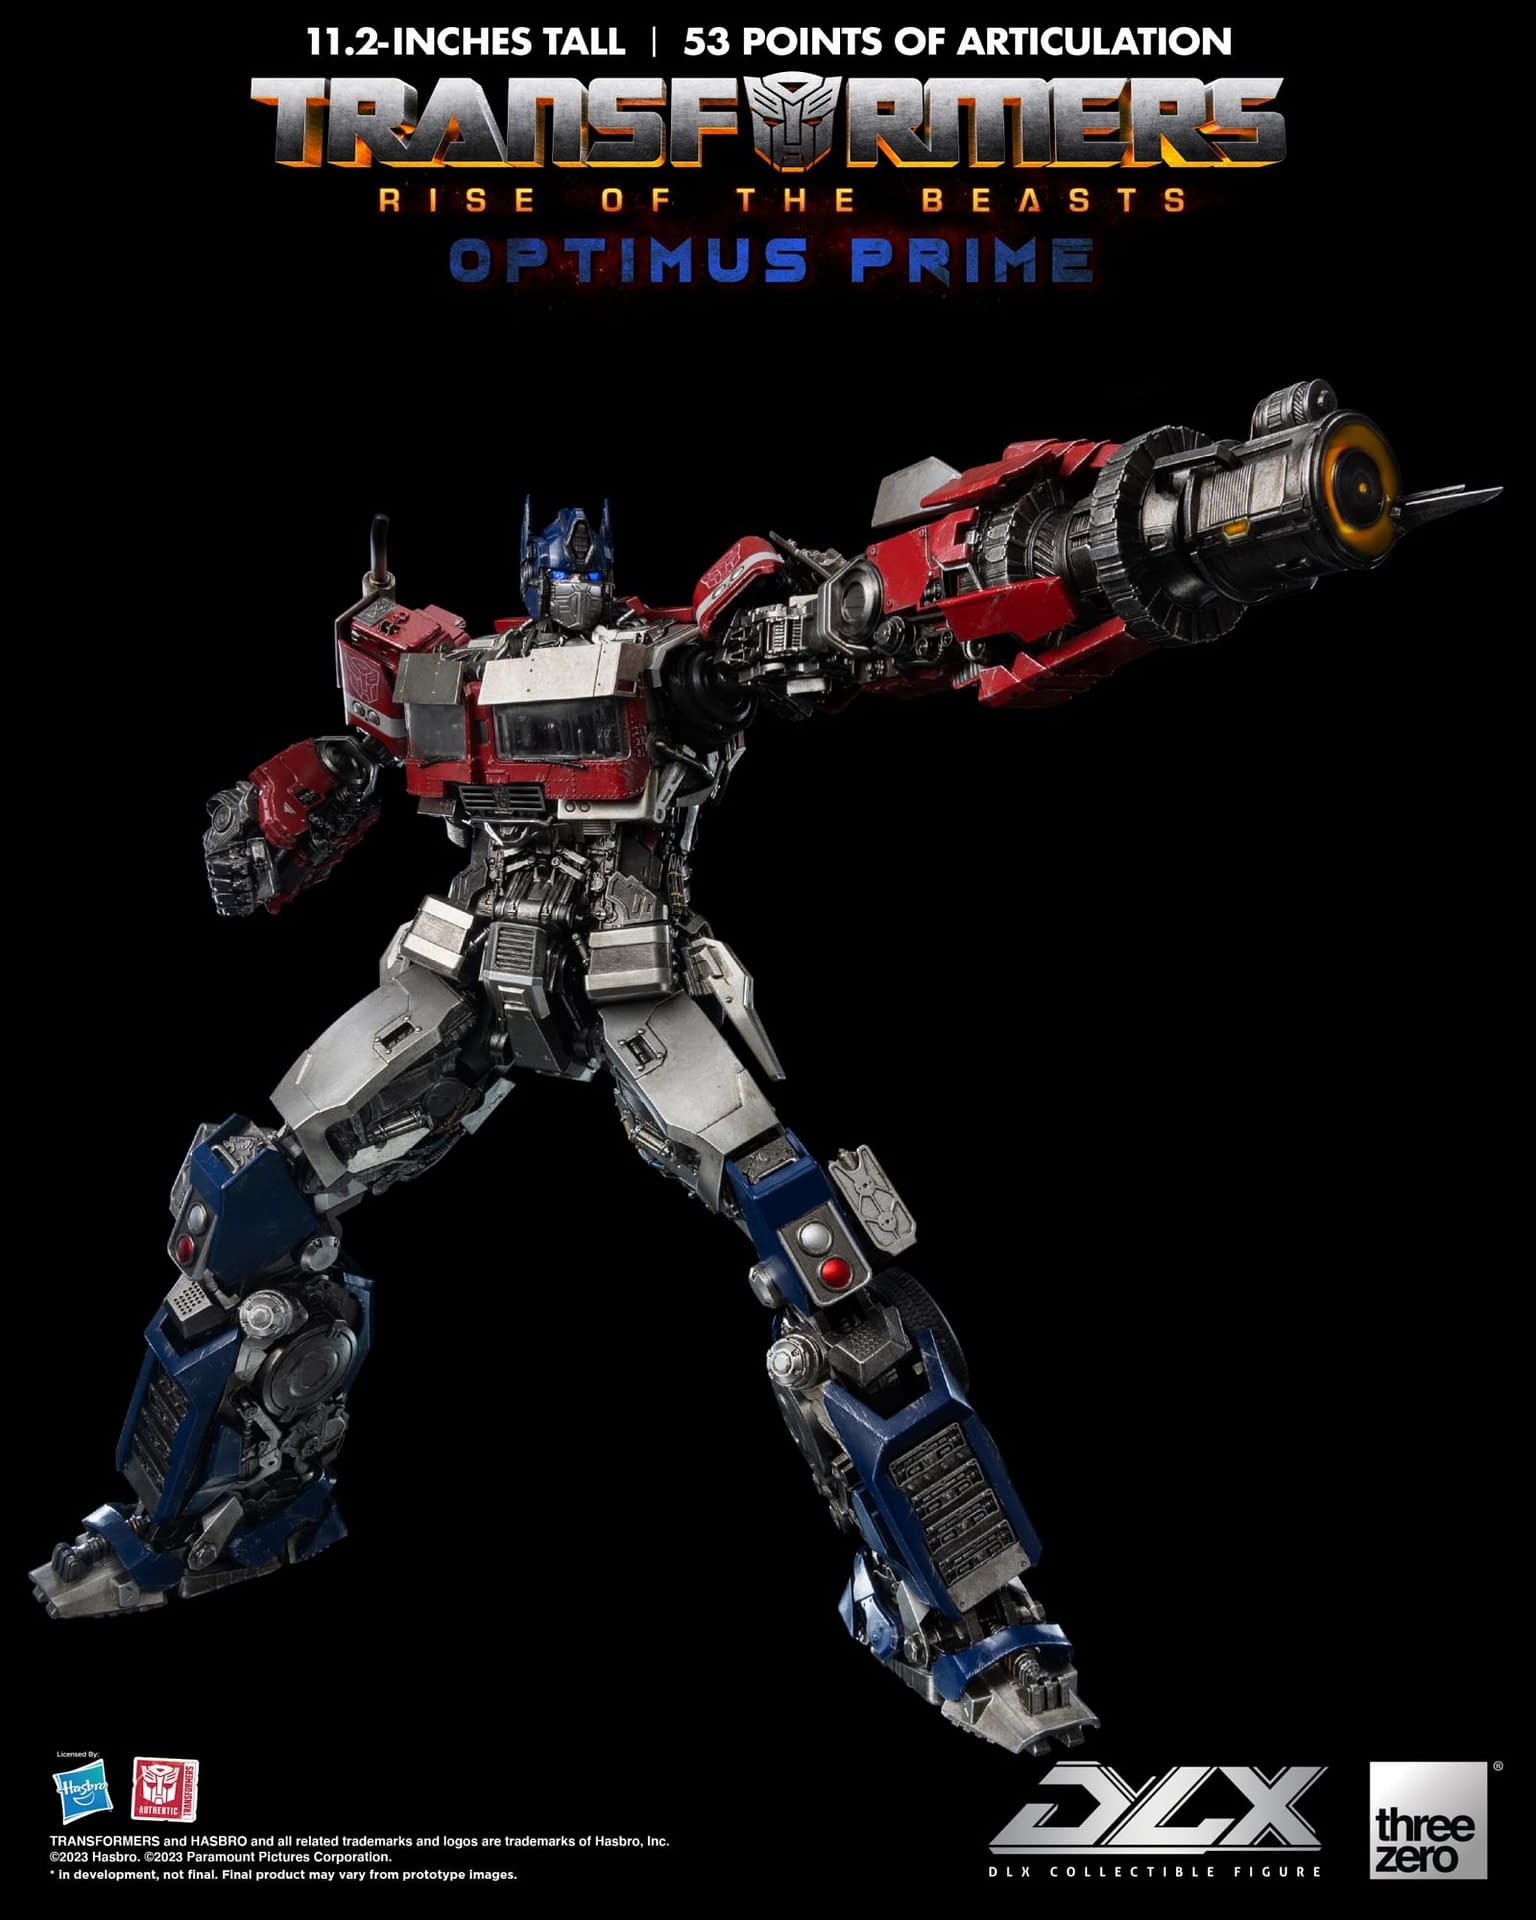 The Movie Version of Optimus Prime From Transformers: Rise of the Beasts Is  Now an Animated Talking Robot Toy